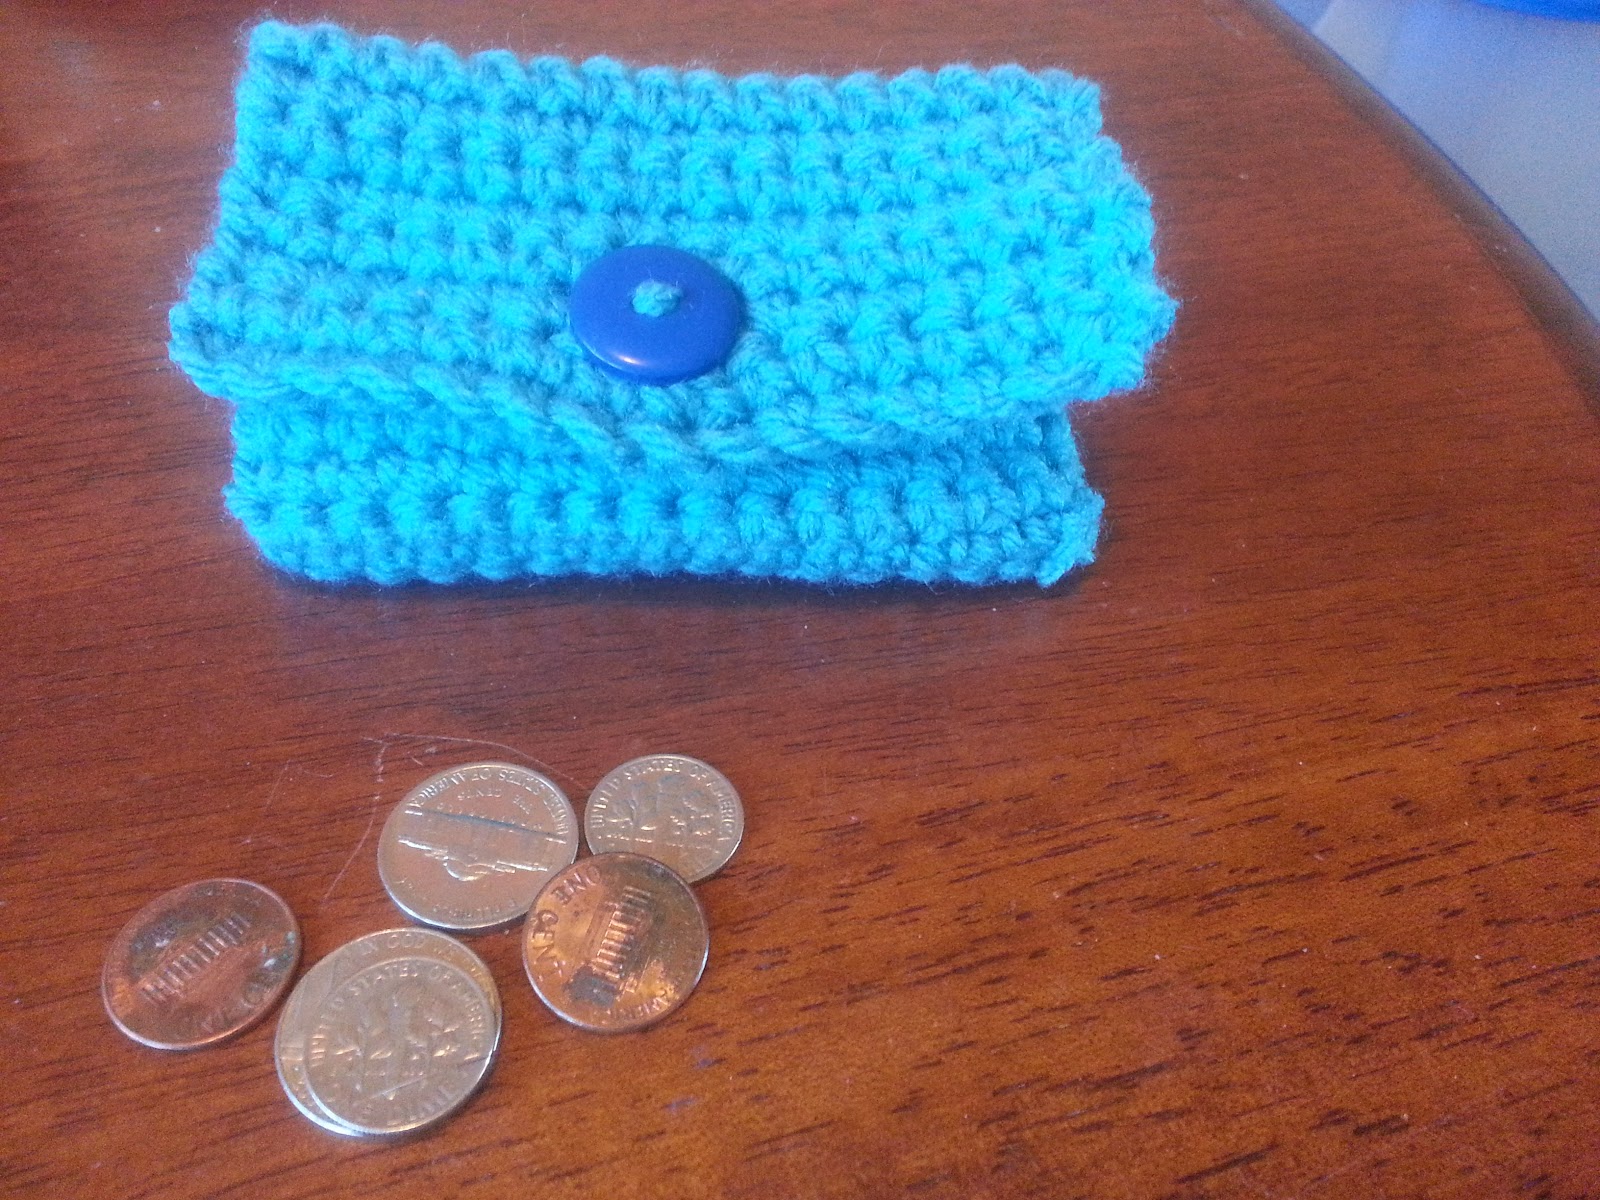 Collection of Crochet Stitches: Pattern: Easy Coin Purse/Wallet